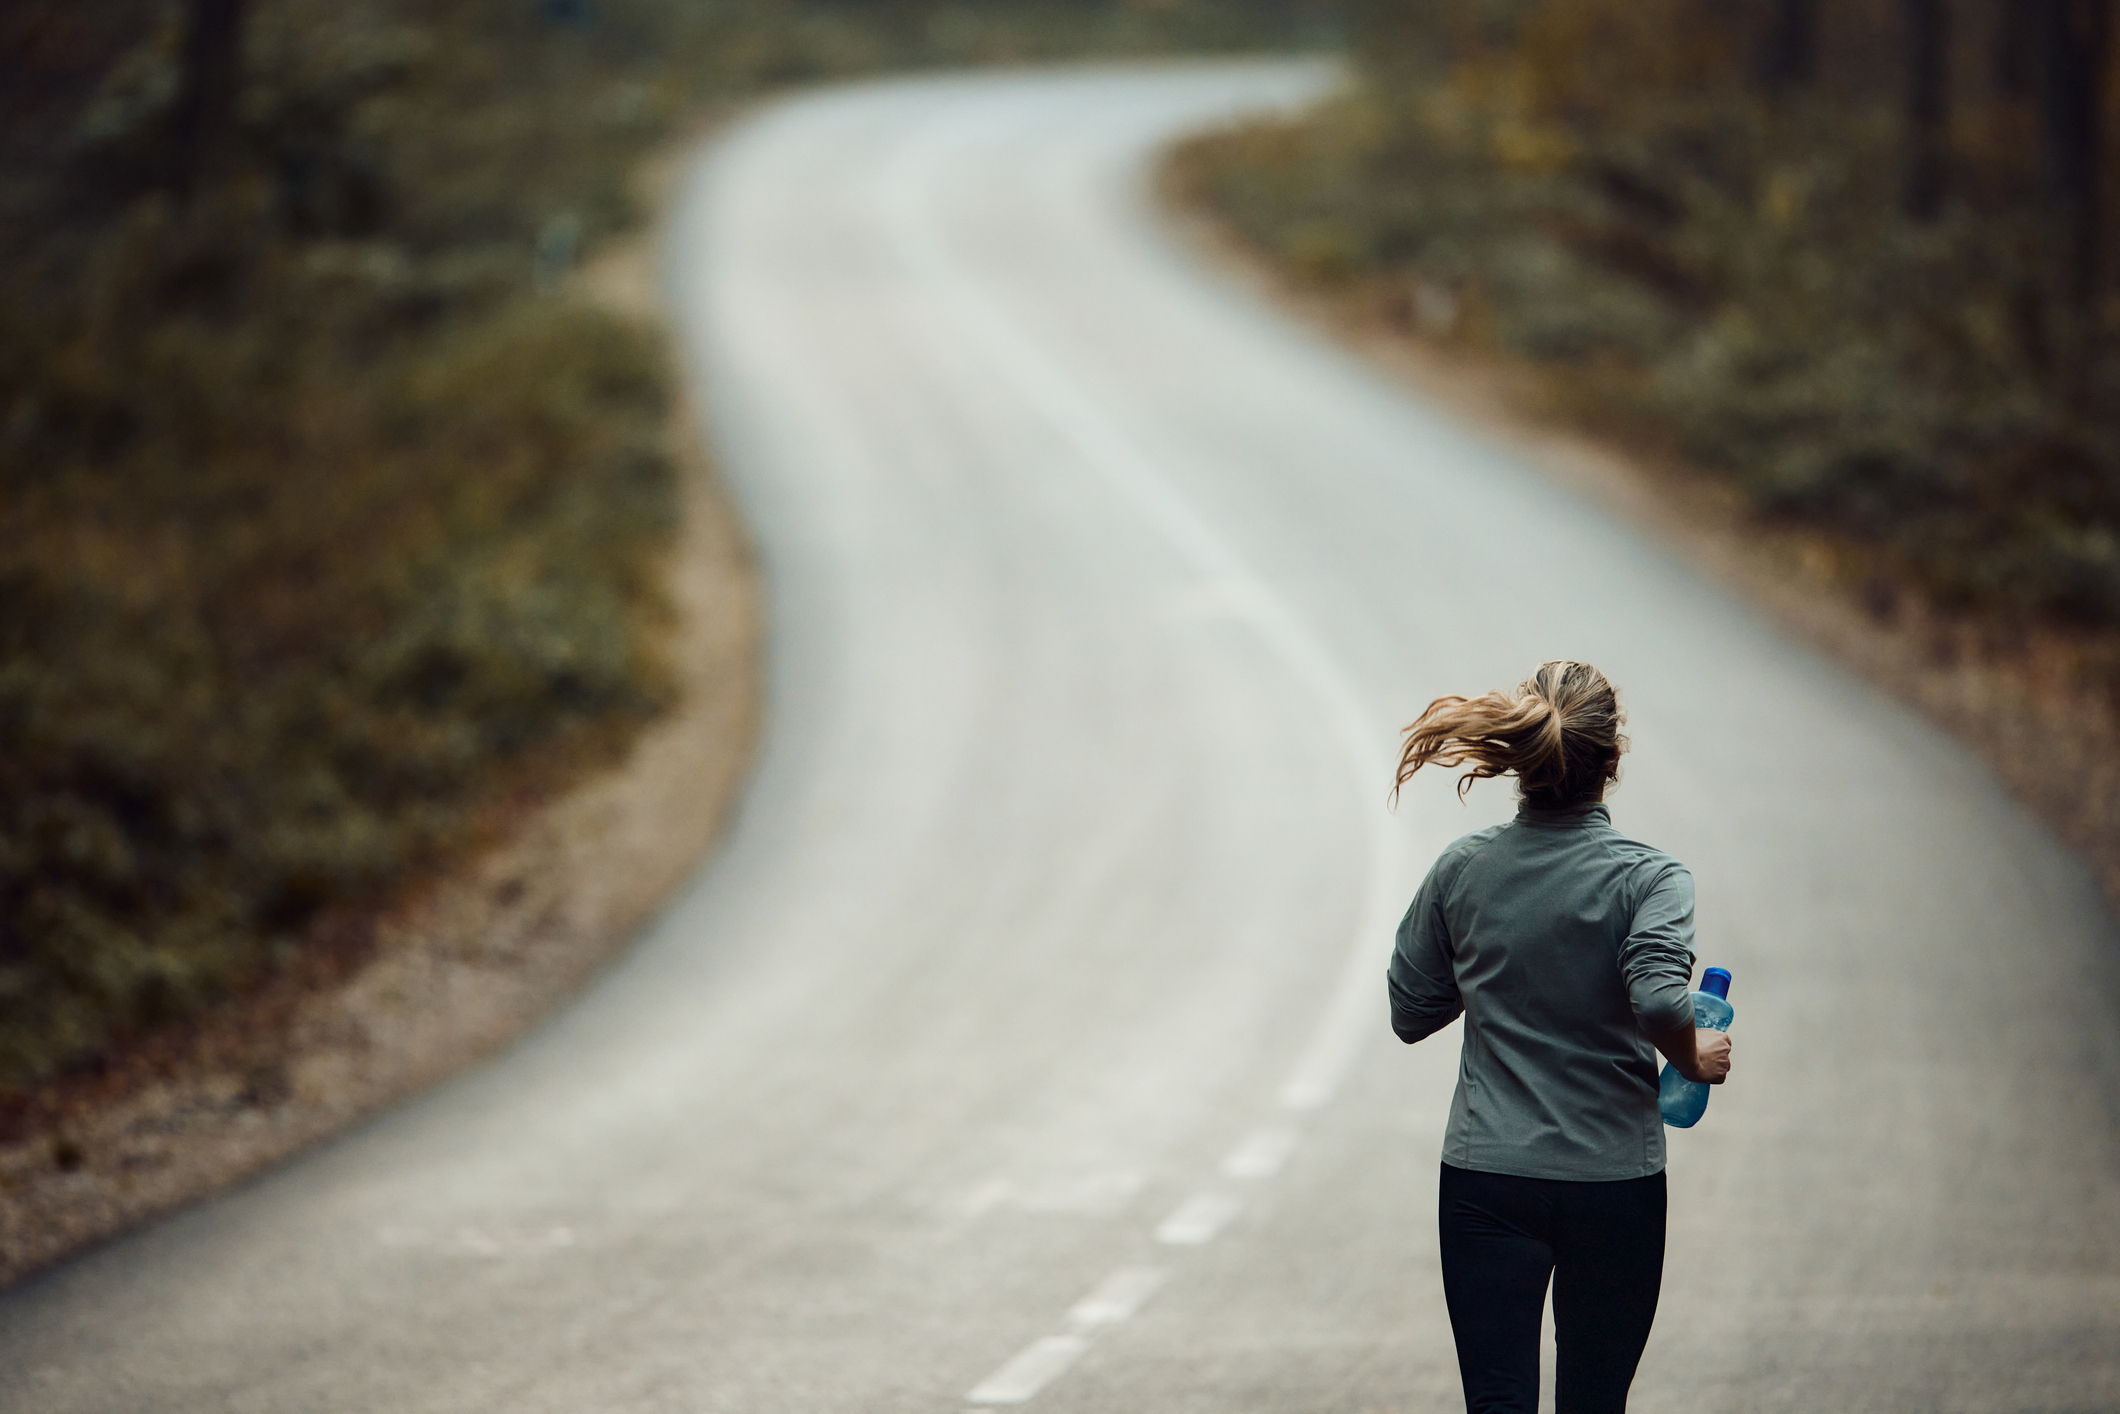 A woman running on a road